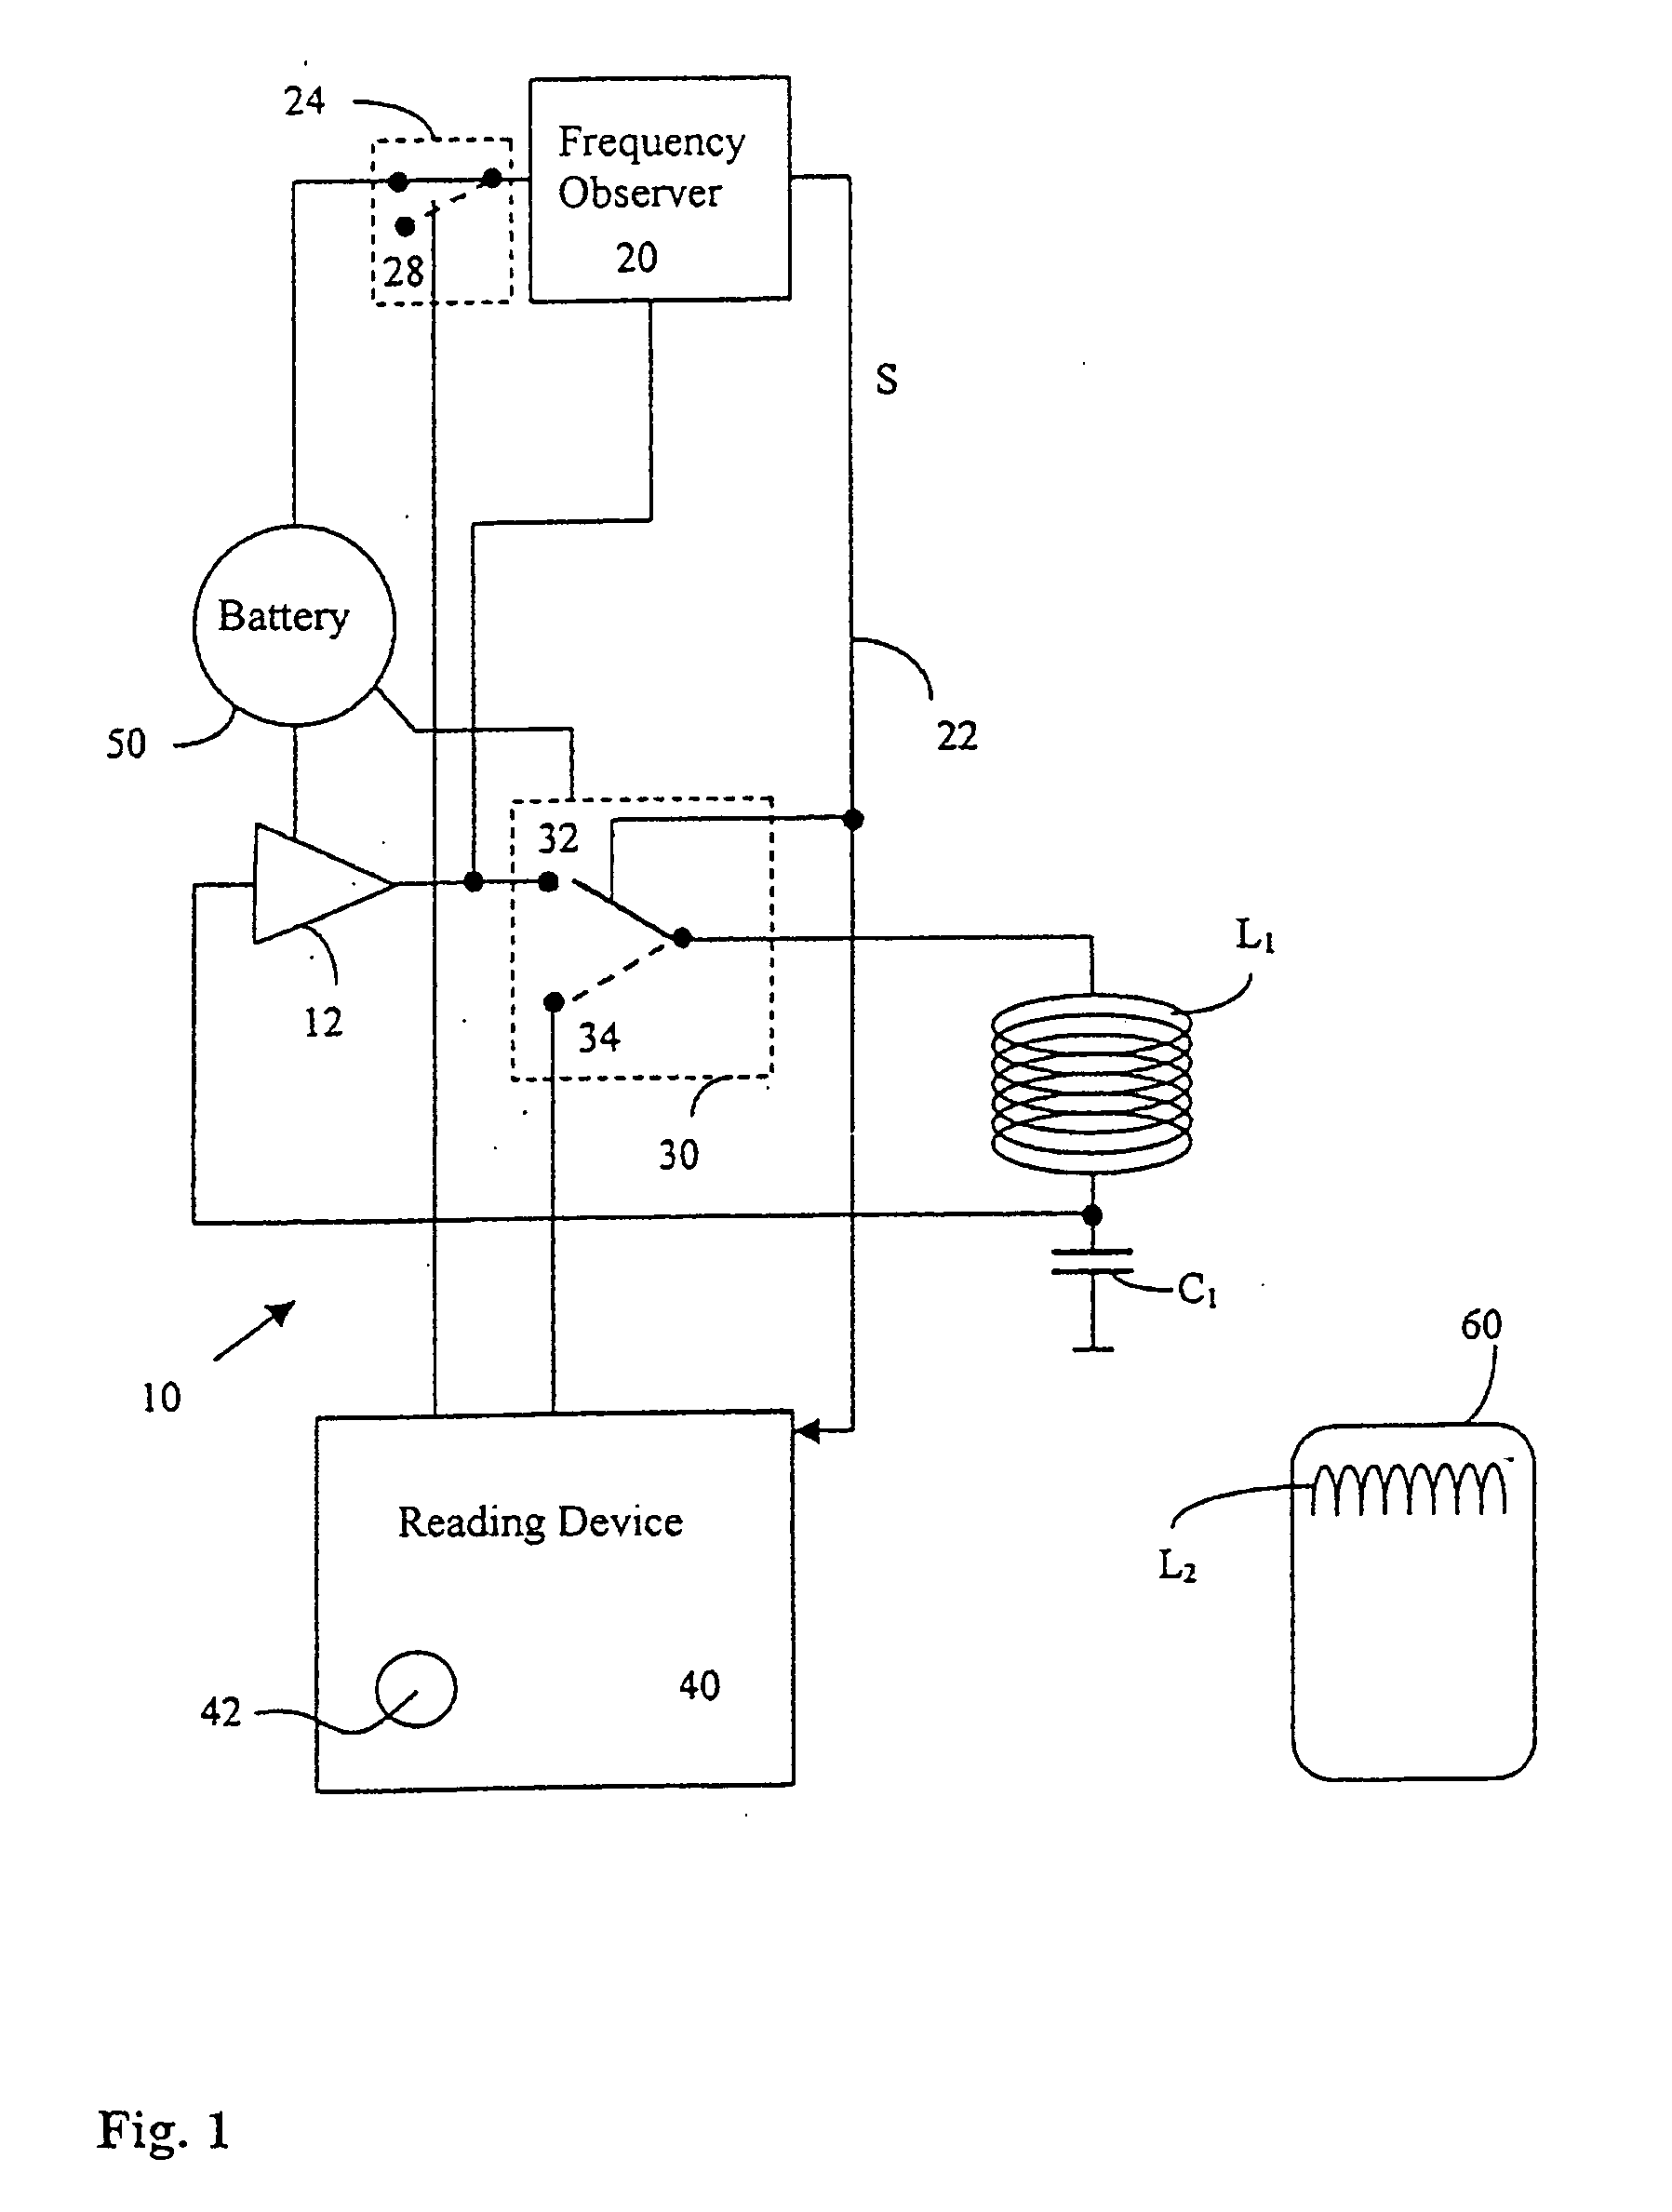 Switching device actuated by a transponder